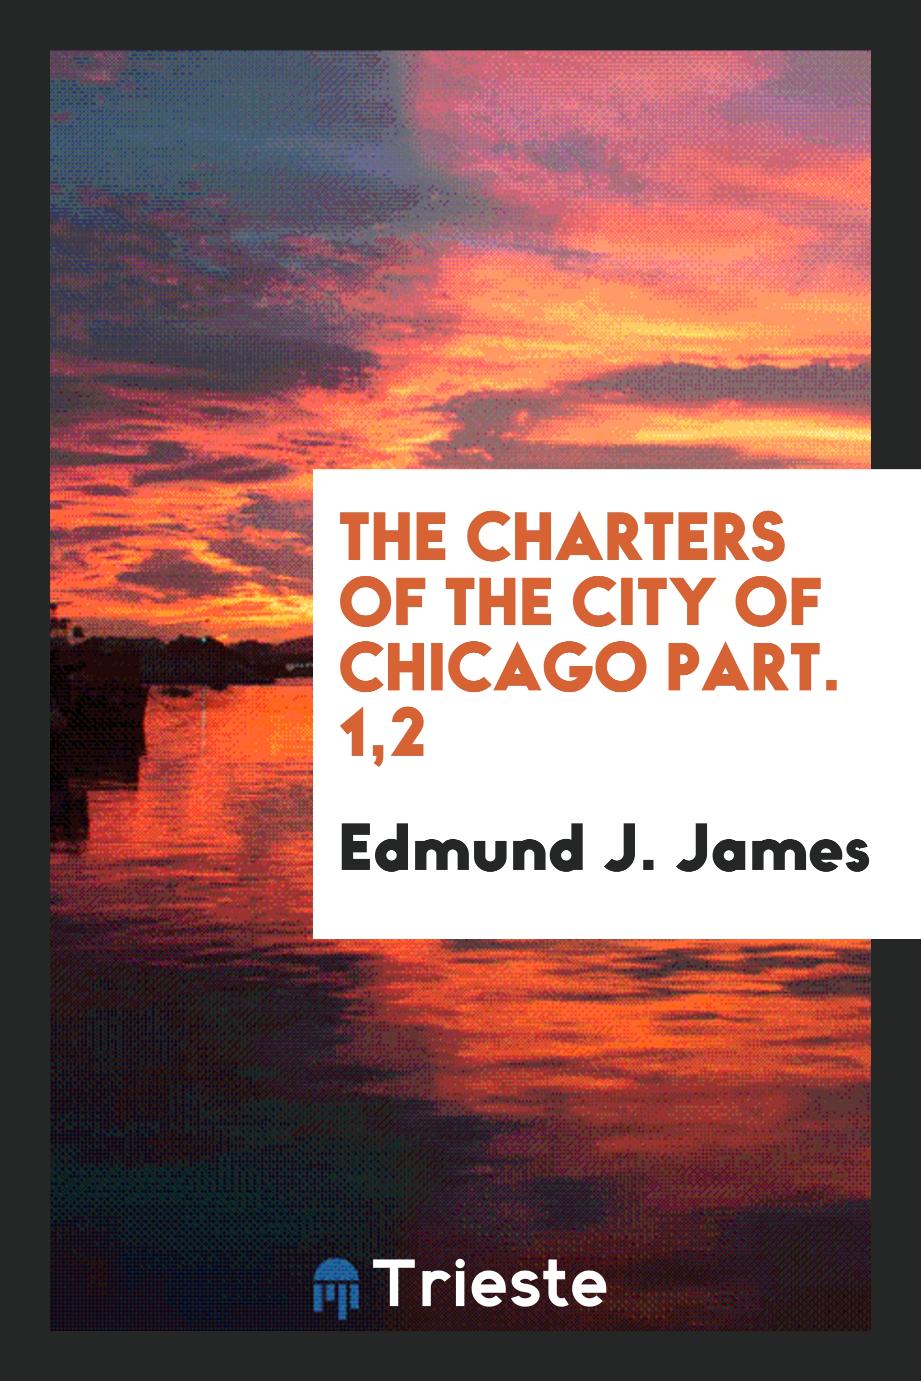 The charters of the city of Chicago Part. 1,2